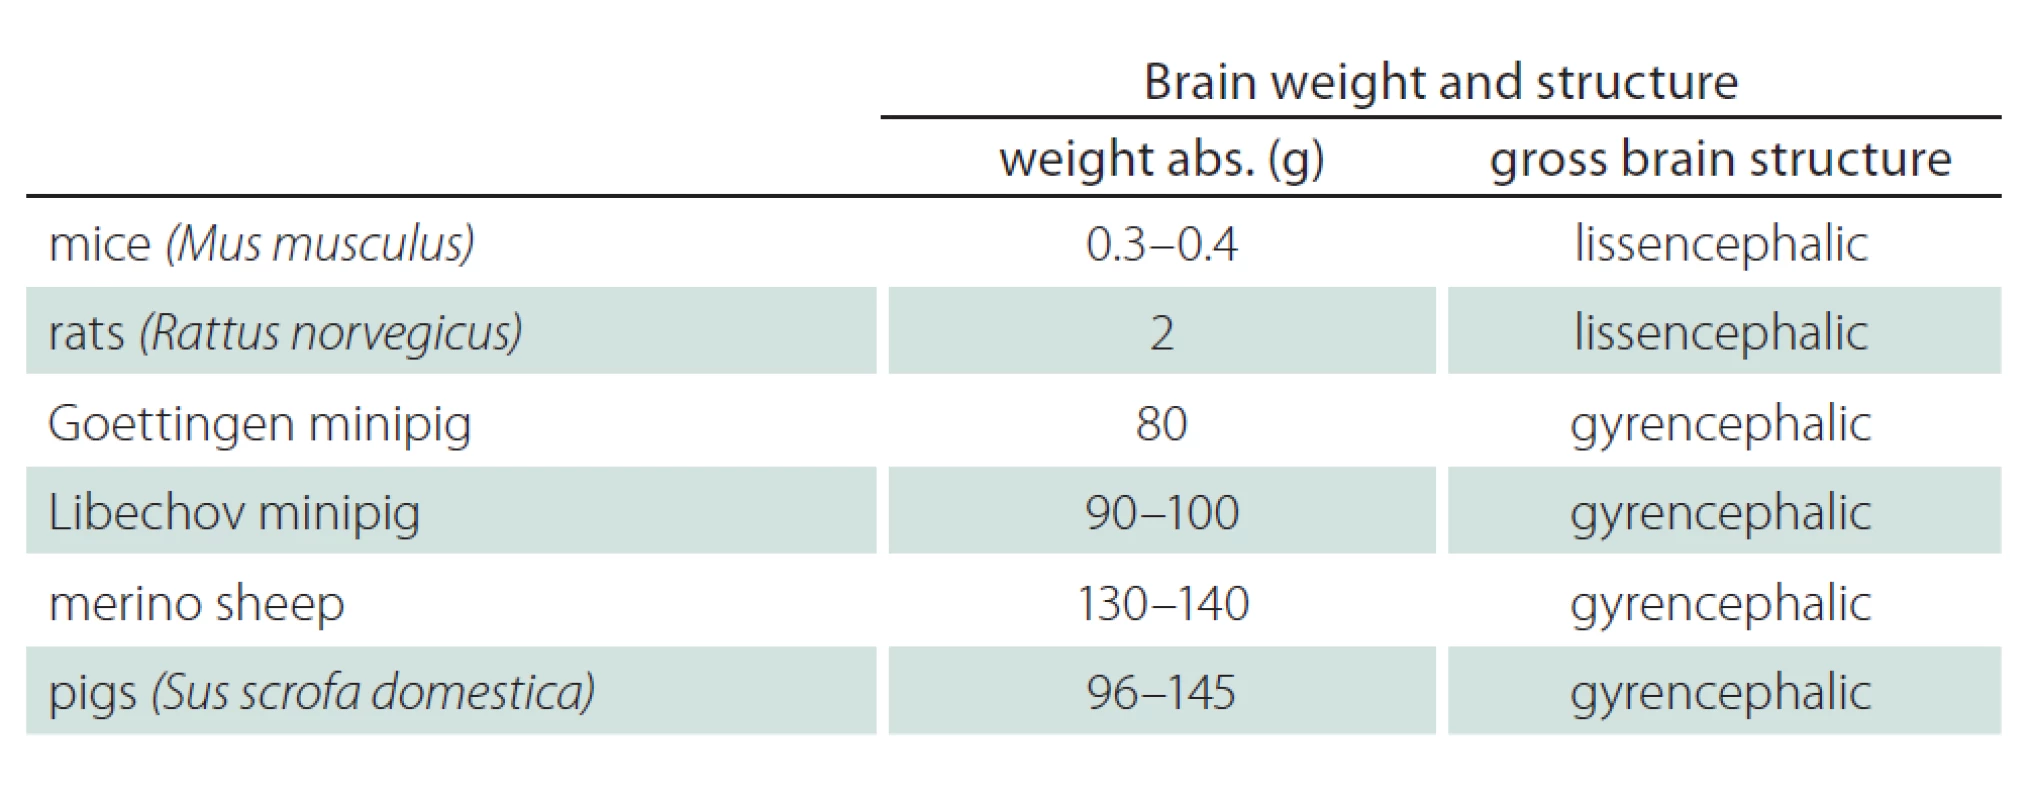 Brain volume and brain structure compared between of mice, rats, sheep and pigs.